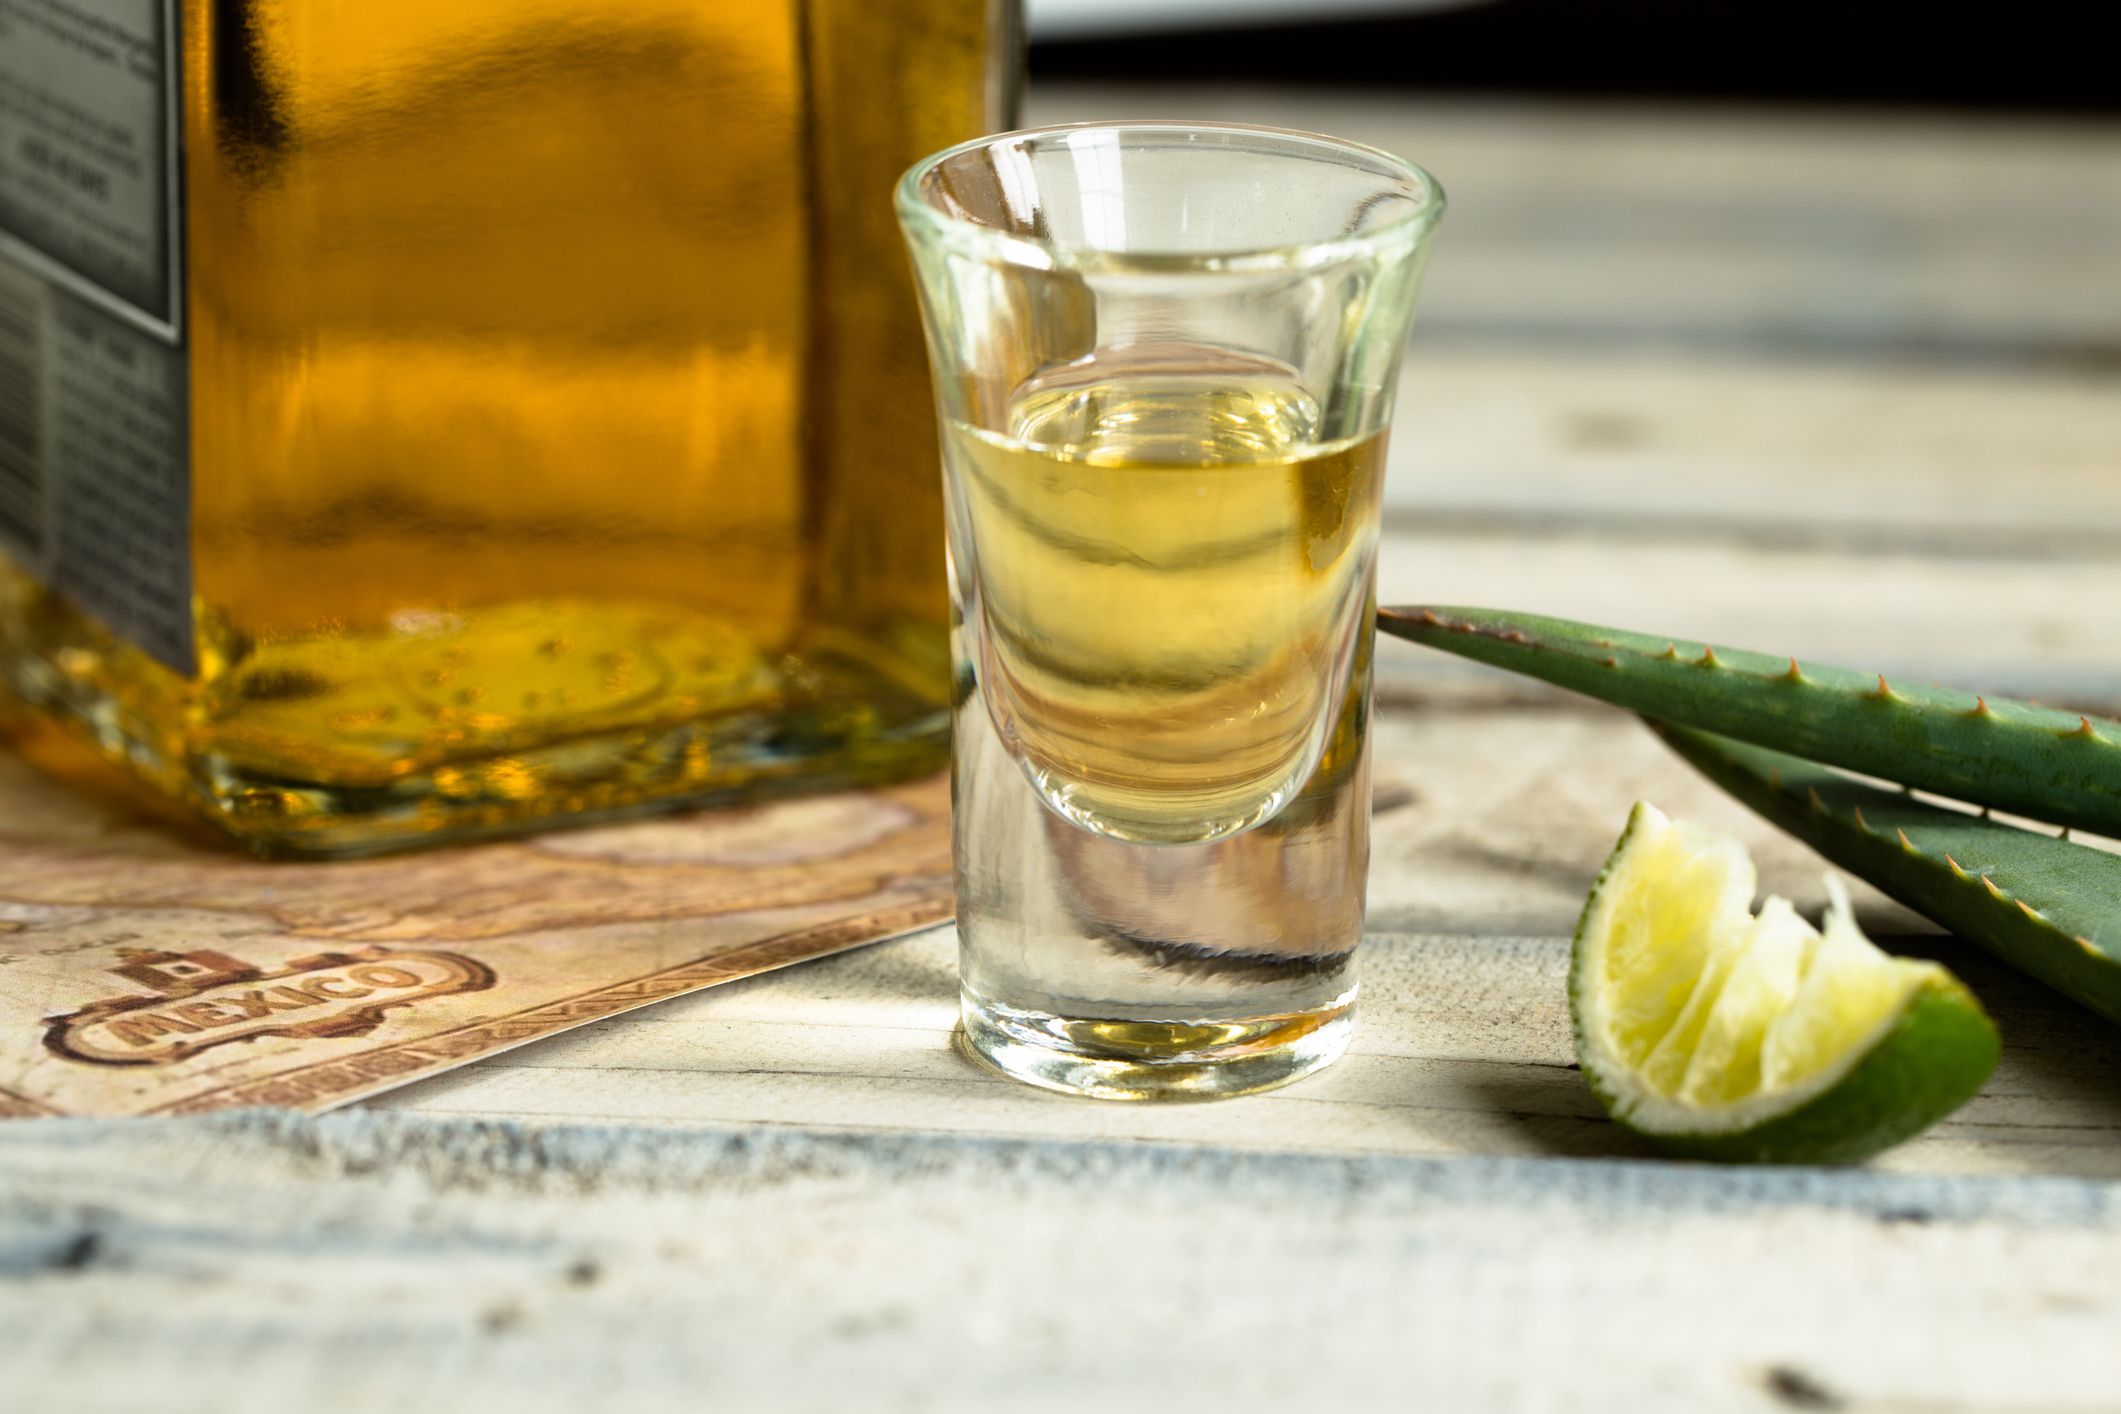 10 Best Tequilas for Margaritas and Shots in 2020